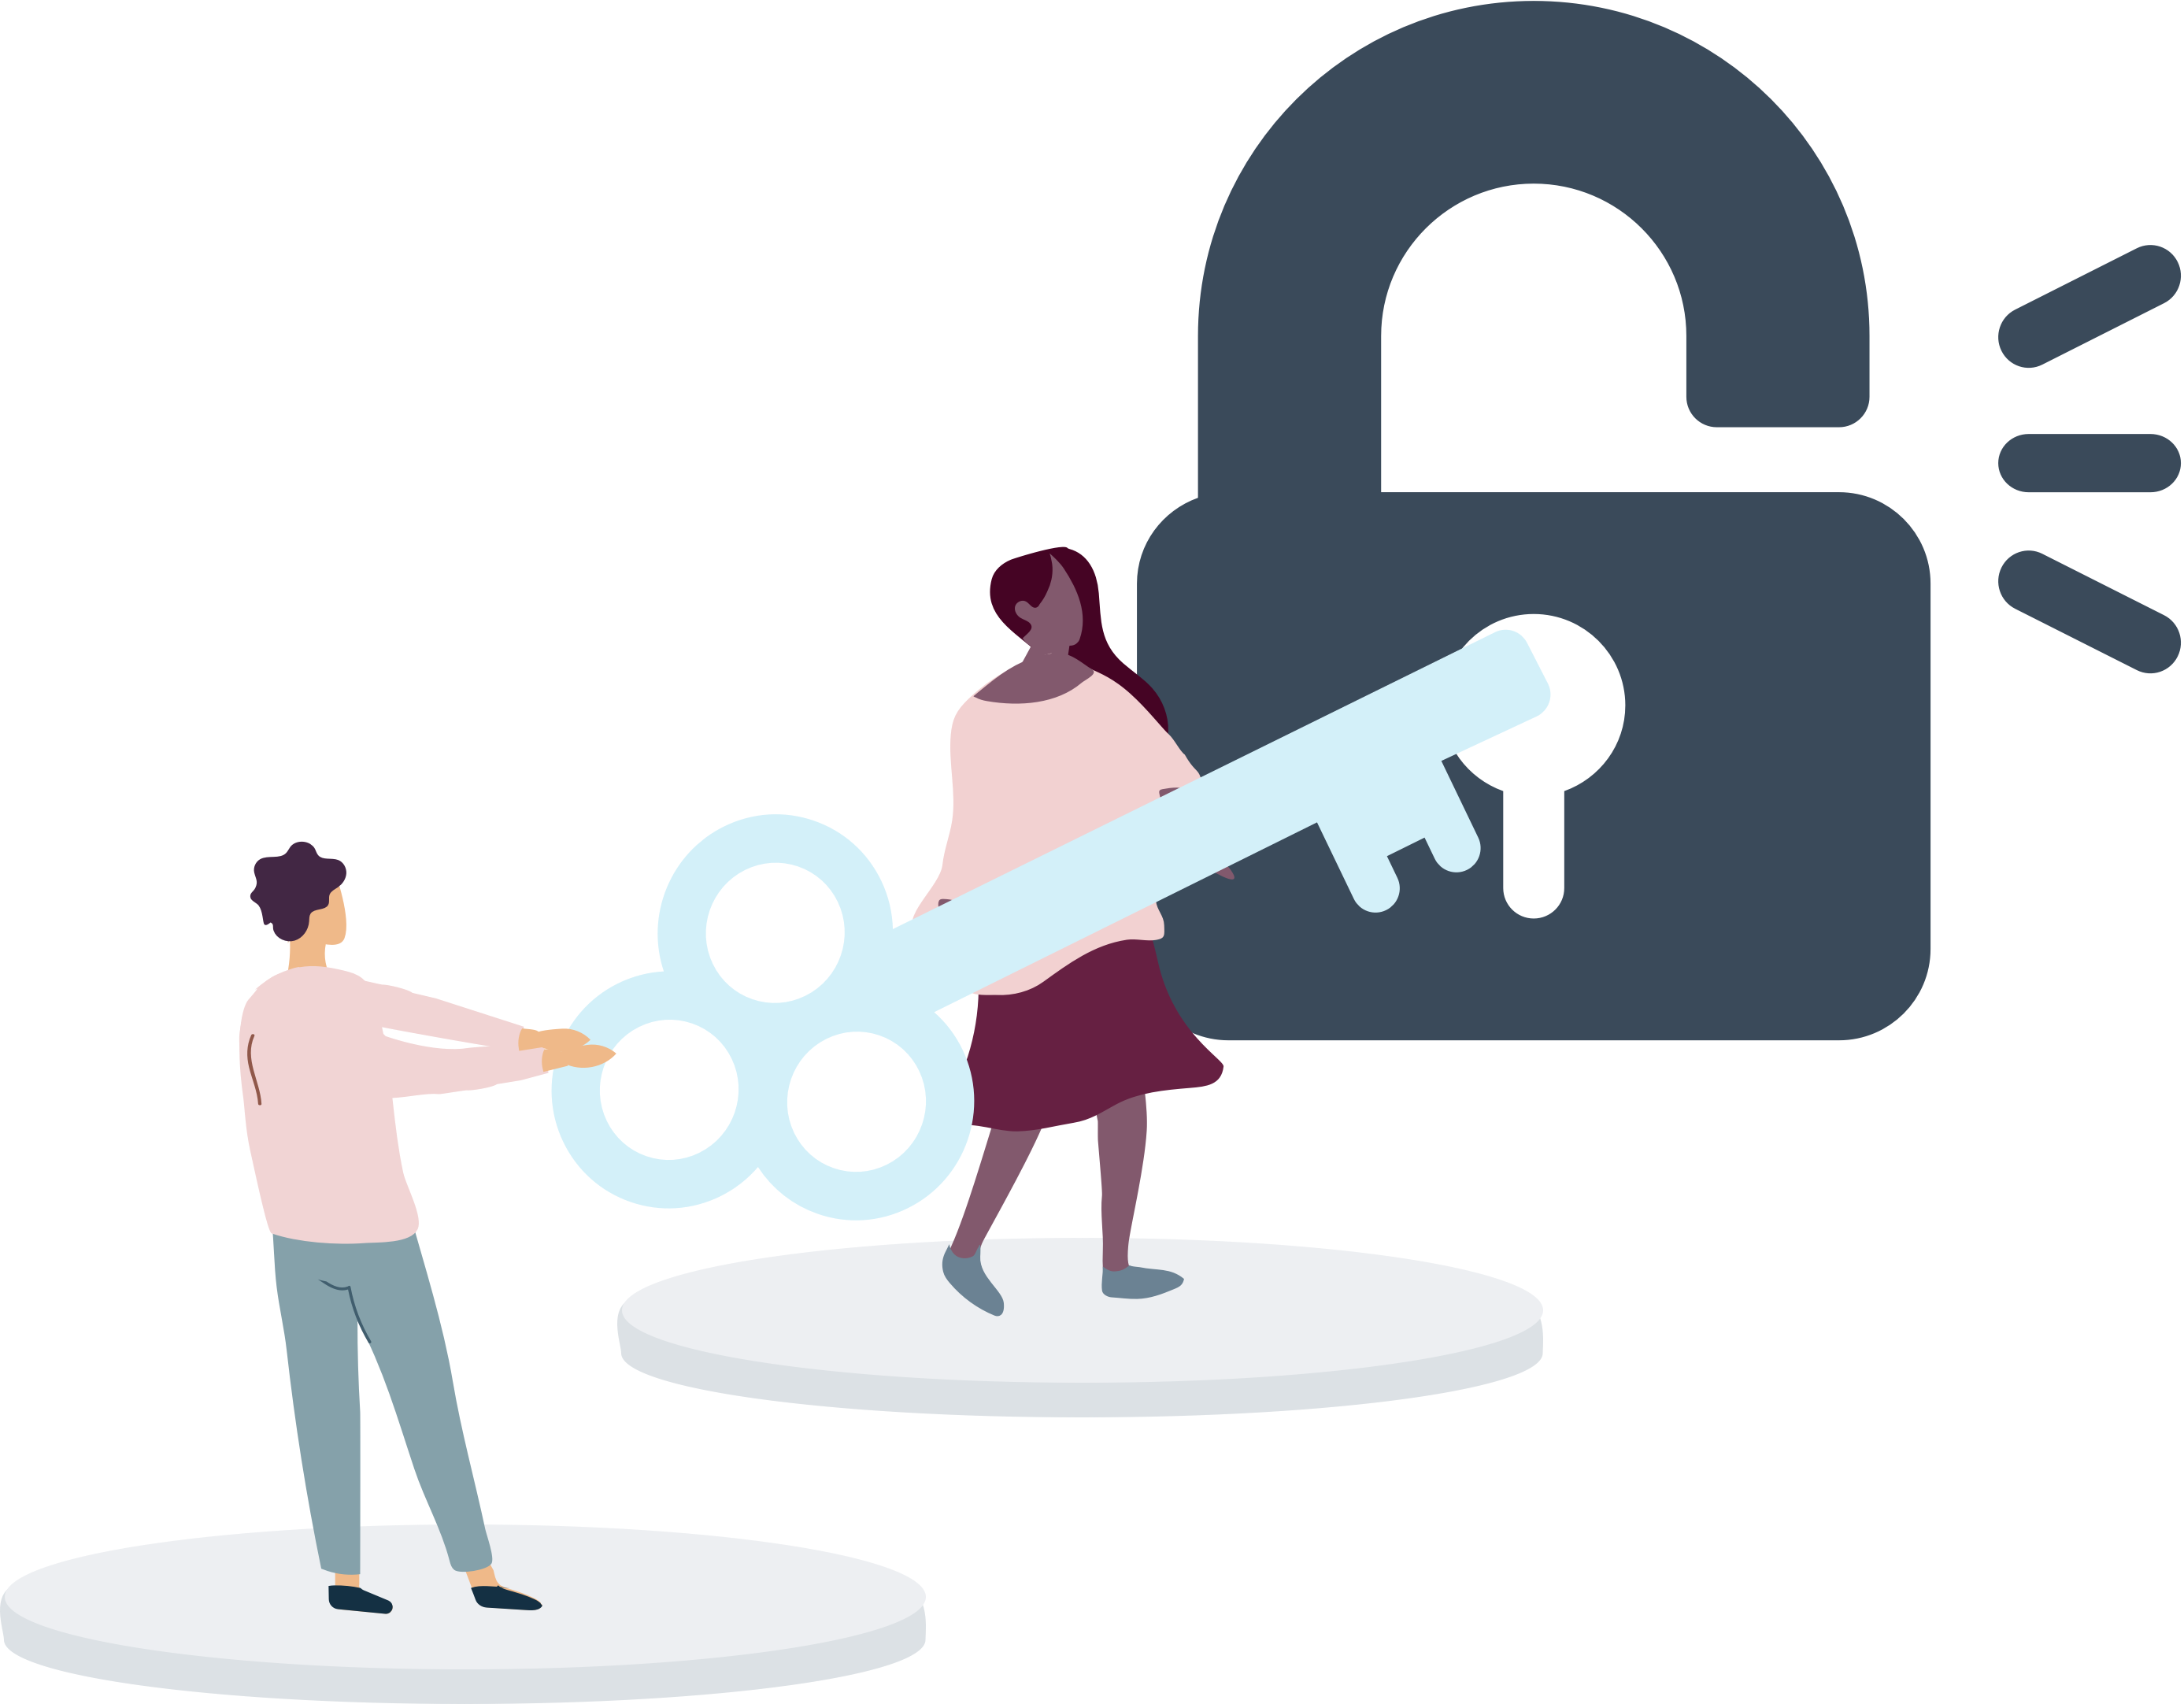 Scoir for colleges - two people holding a large key to unlock padlock